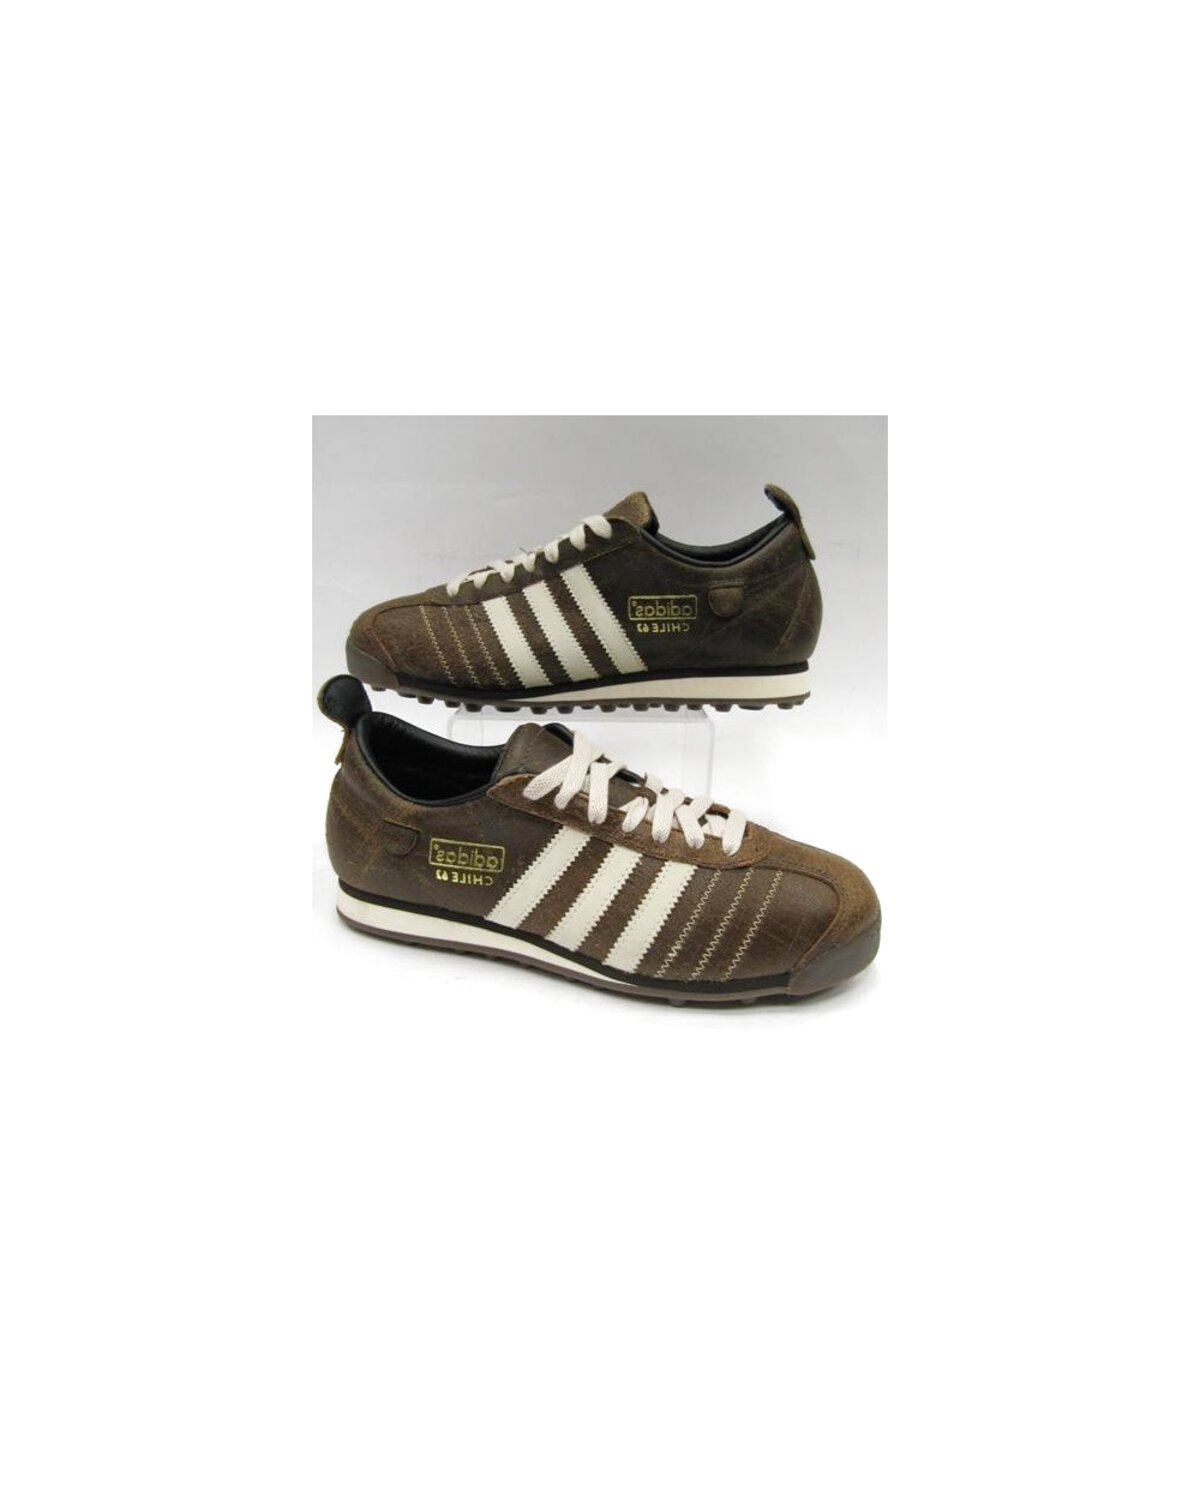 Adidas Chile Trainers for sale in UK | 48 used Adidas Chile Trainers